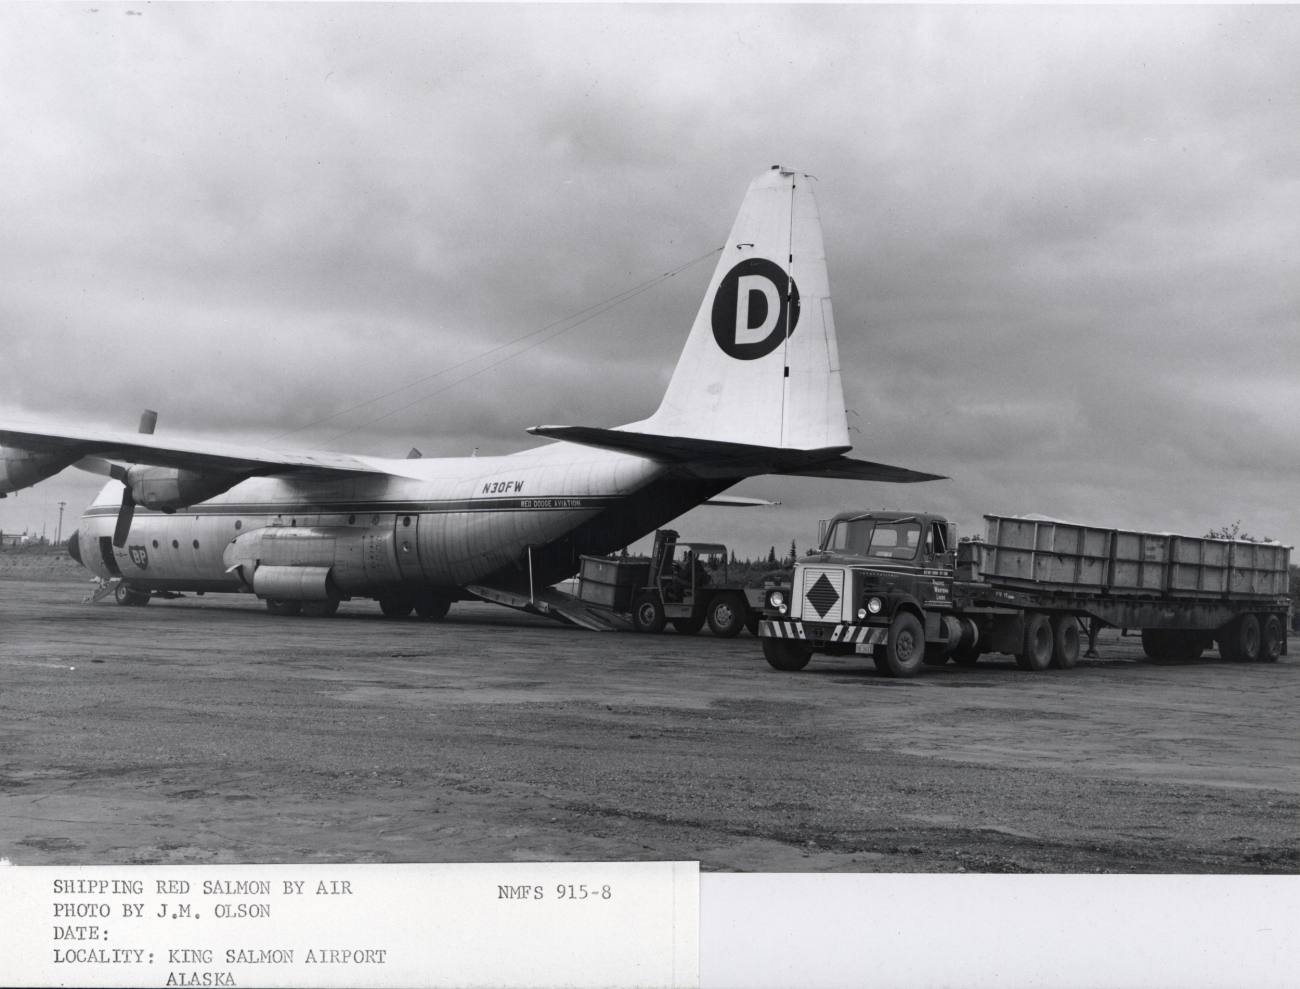 Containers of red salmon are unloaded from a semi-truck and placed aboard a huge Hercules aircraft for transfer to processing plants in Anchorage and otherareas